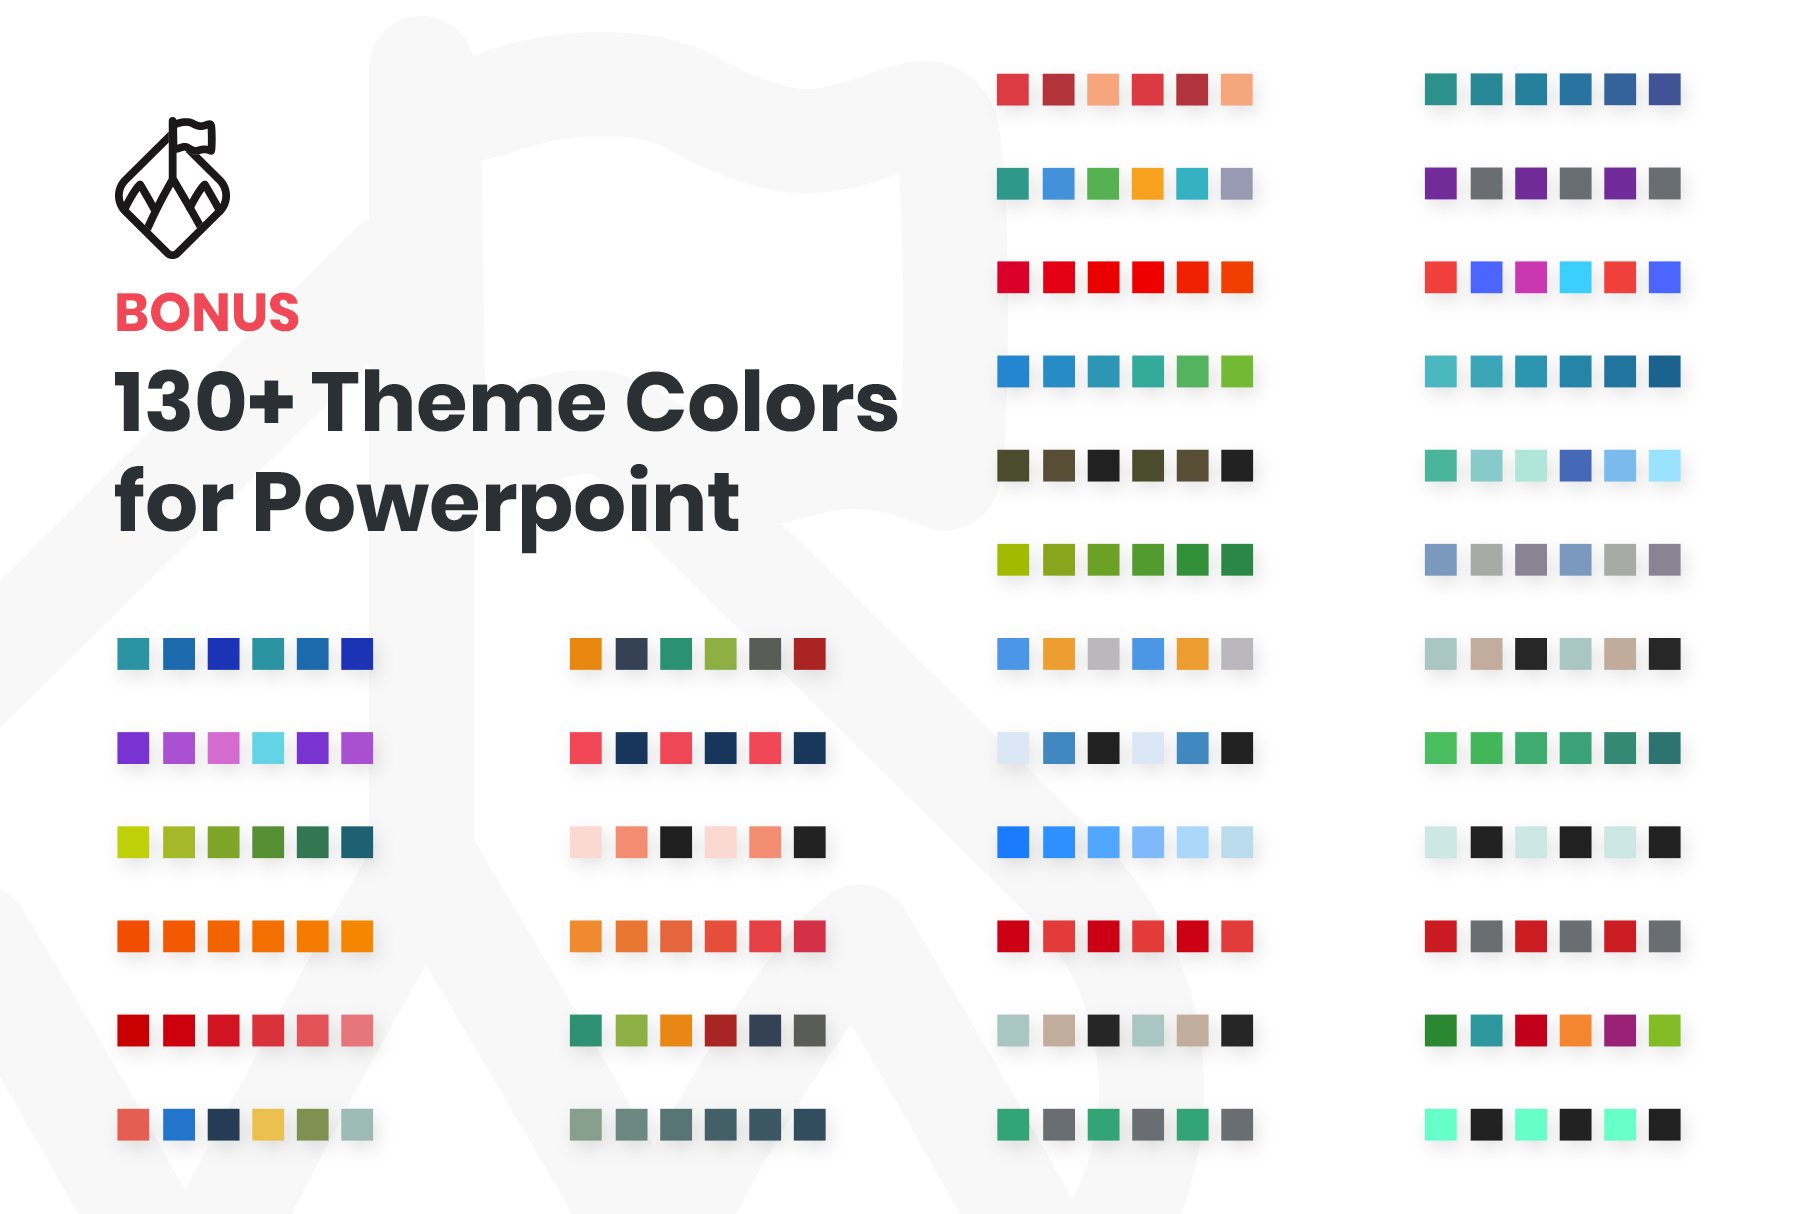 Real Estate Infographic includes 130 color themes for powerpoint.